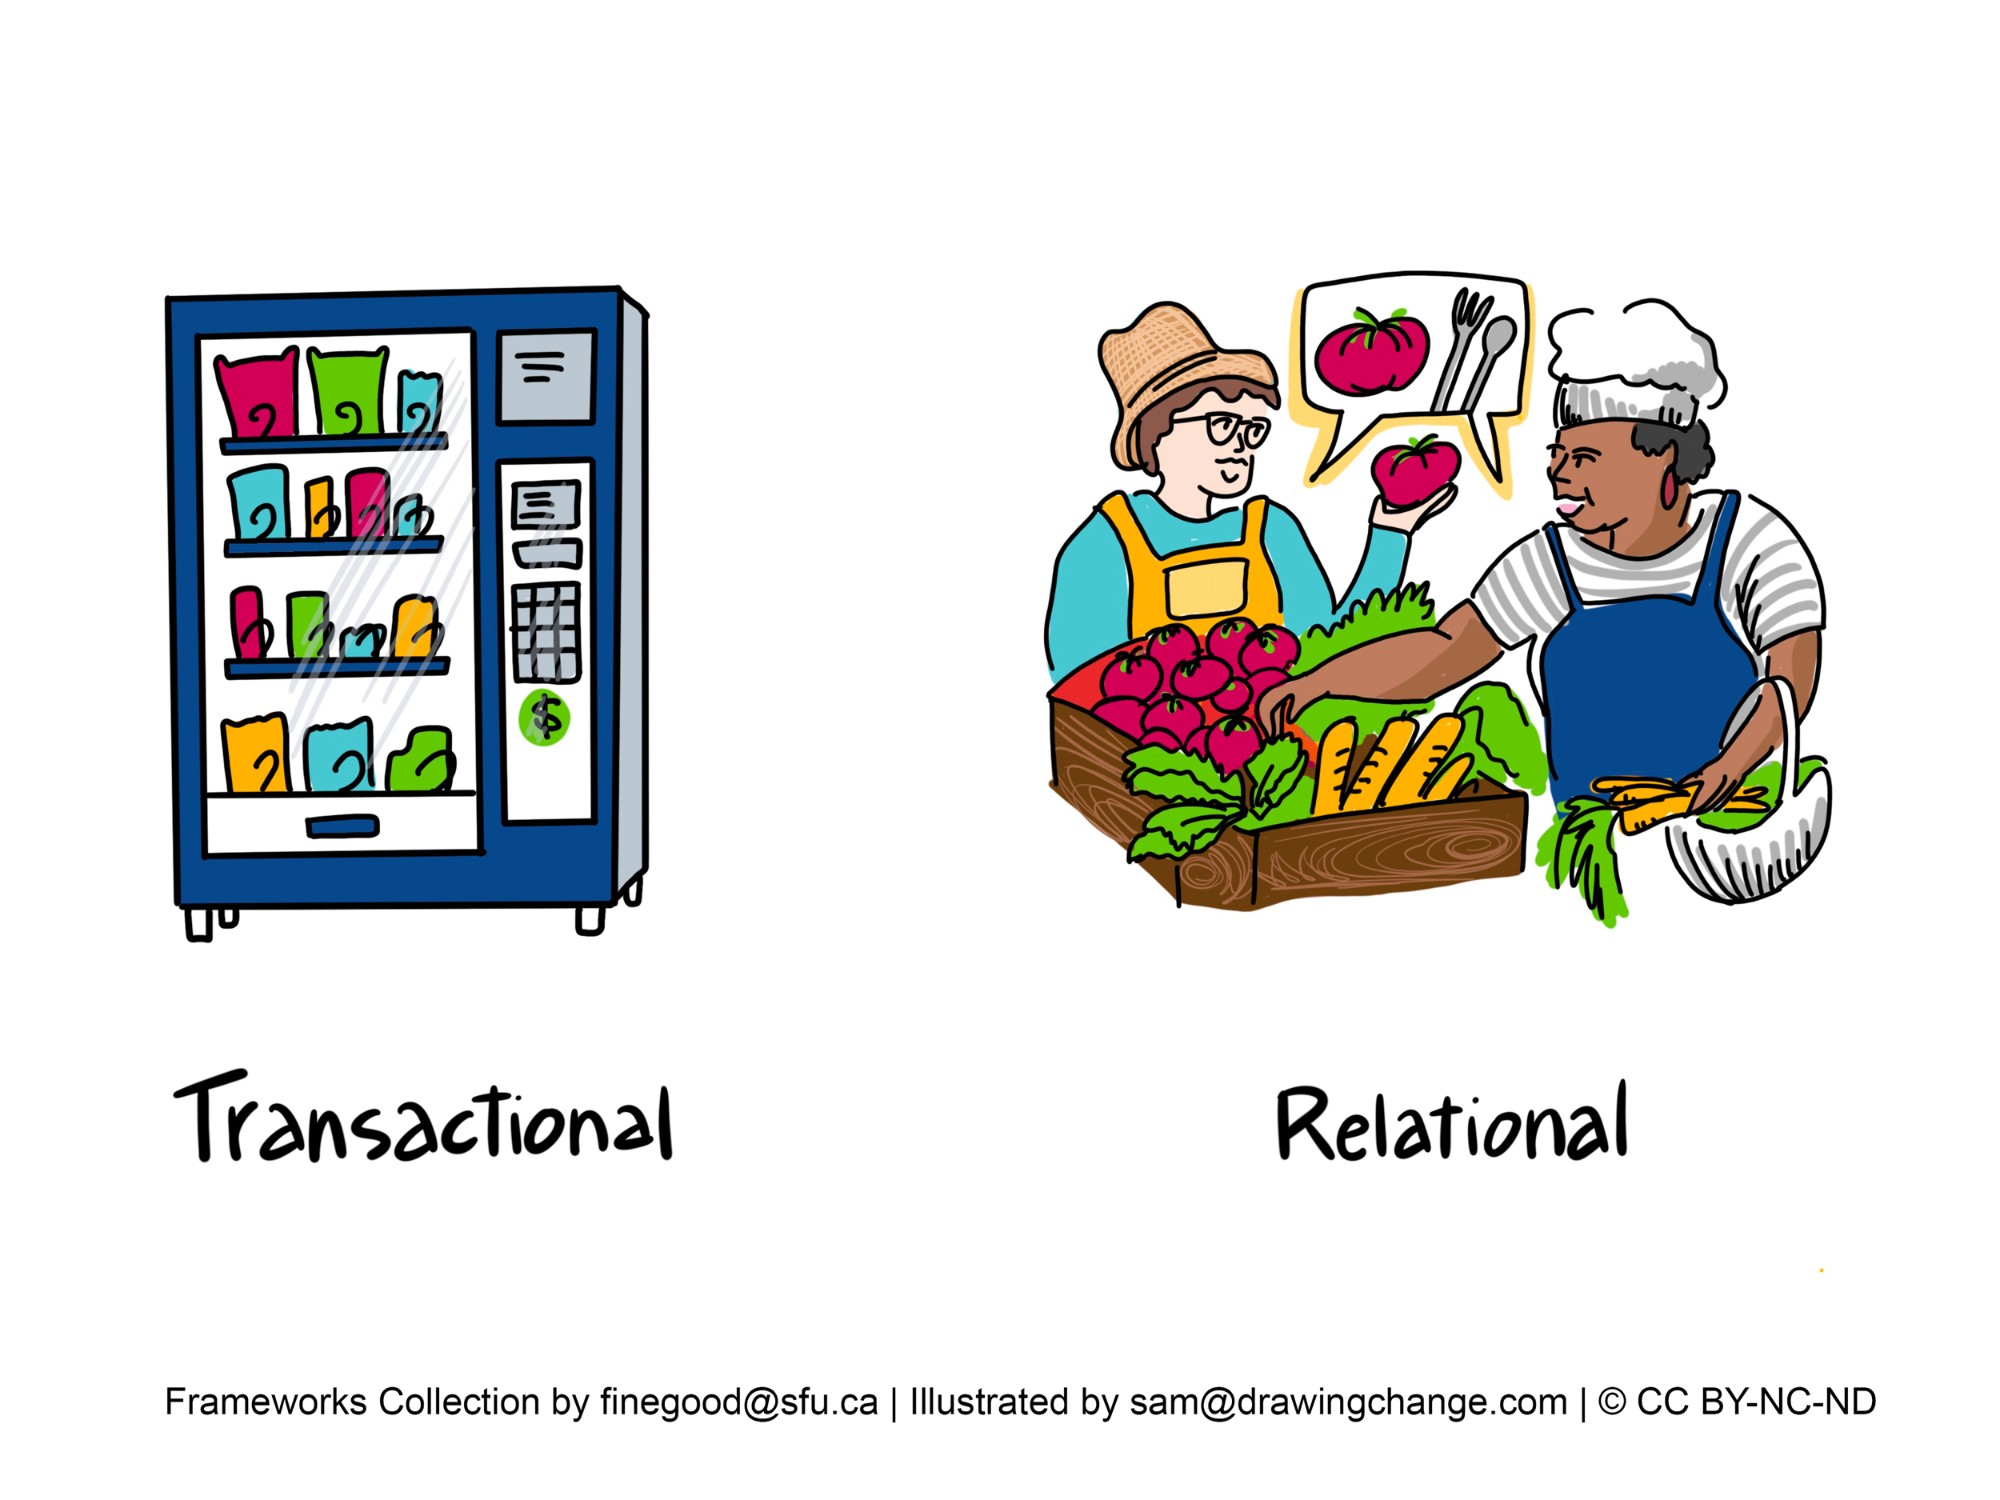 The image features two contrasting illustrations that metaphorically represent "Transactional" and "Relational" concepts.  On the left side under the title "Transactional", there is a drawing of a vending machine filled with colorful snacks and drinks, signifying impersonal, automated exchanges. The vending machine has a money slot indicating the necessity of payment for service.  On the right side under the title "Relational", there is an illustration of two people engaging with each other at a market stand. One person is wearing a hat and an apron, and is handing out a vegetable to the other person, who is wearing a chef's hat and holding a knife and a bowl. There are speech bubbles above them with a picture of a tomato and a beet, indicating a conversation and personal connection about the produce.  At the bottom of the image, the credits read: "Frameworks Collection by finegood@sfu.ca | Illustrated by sam@drawingchange.com | © CC BY-NC-ND".